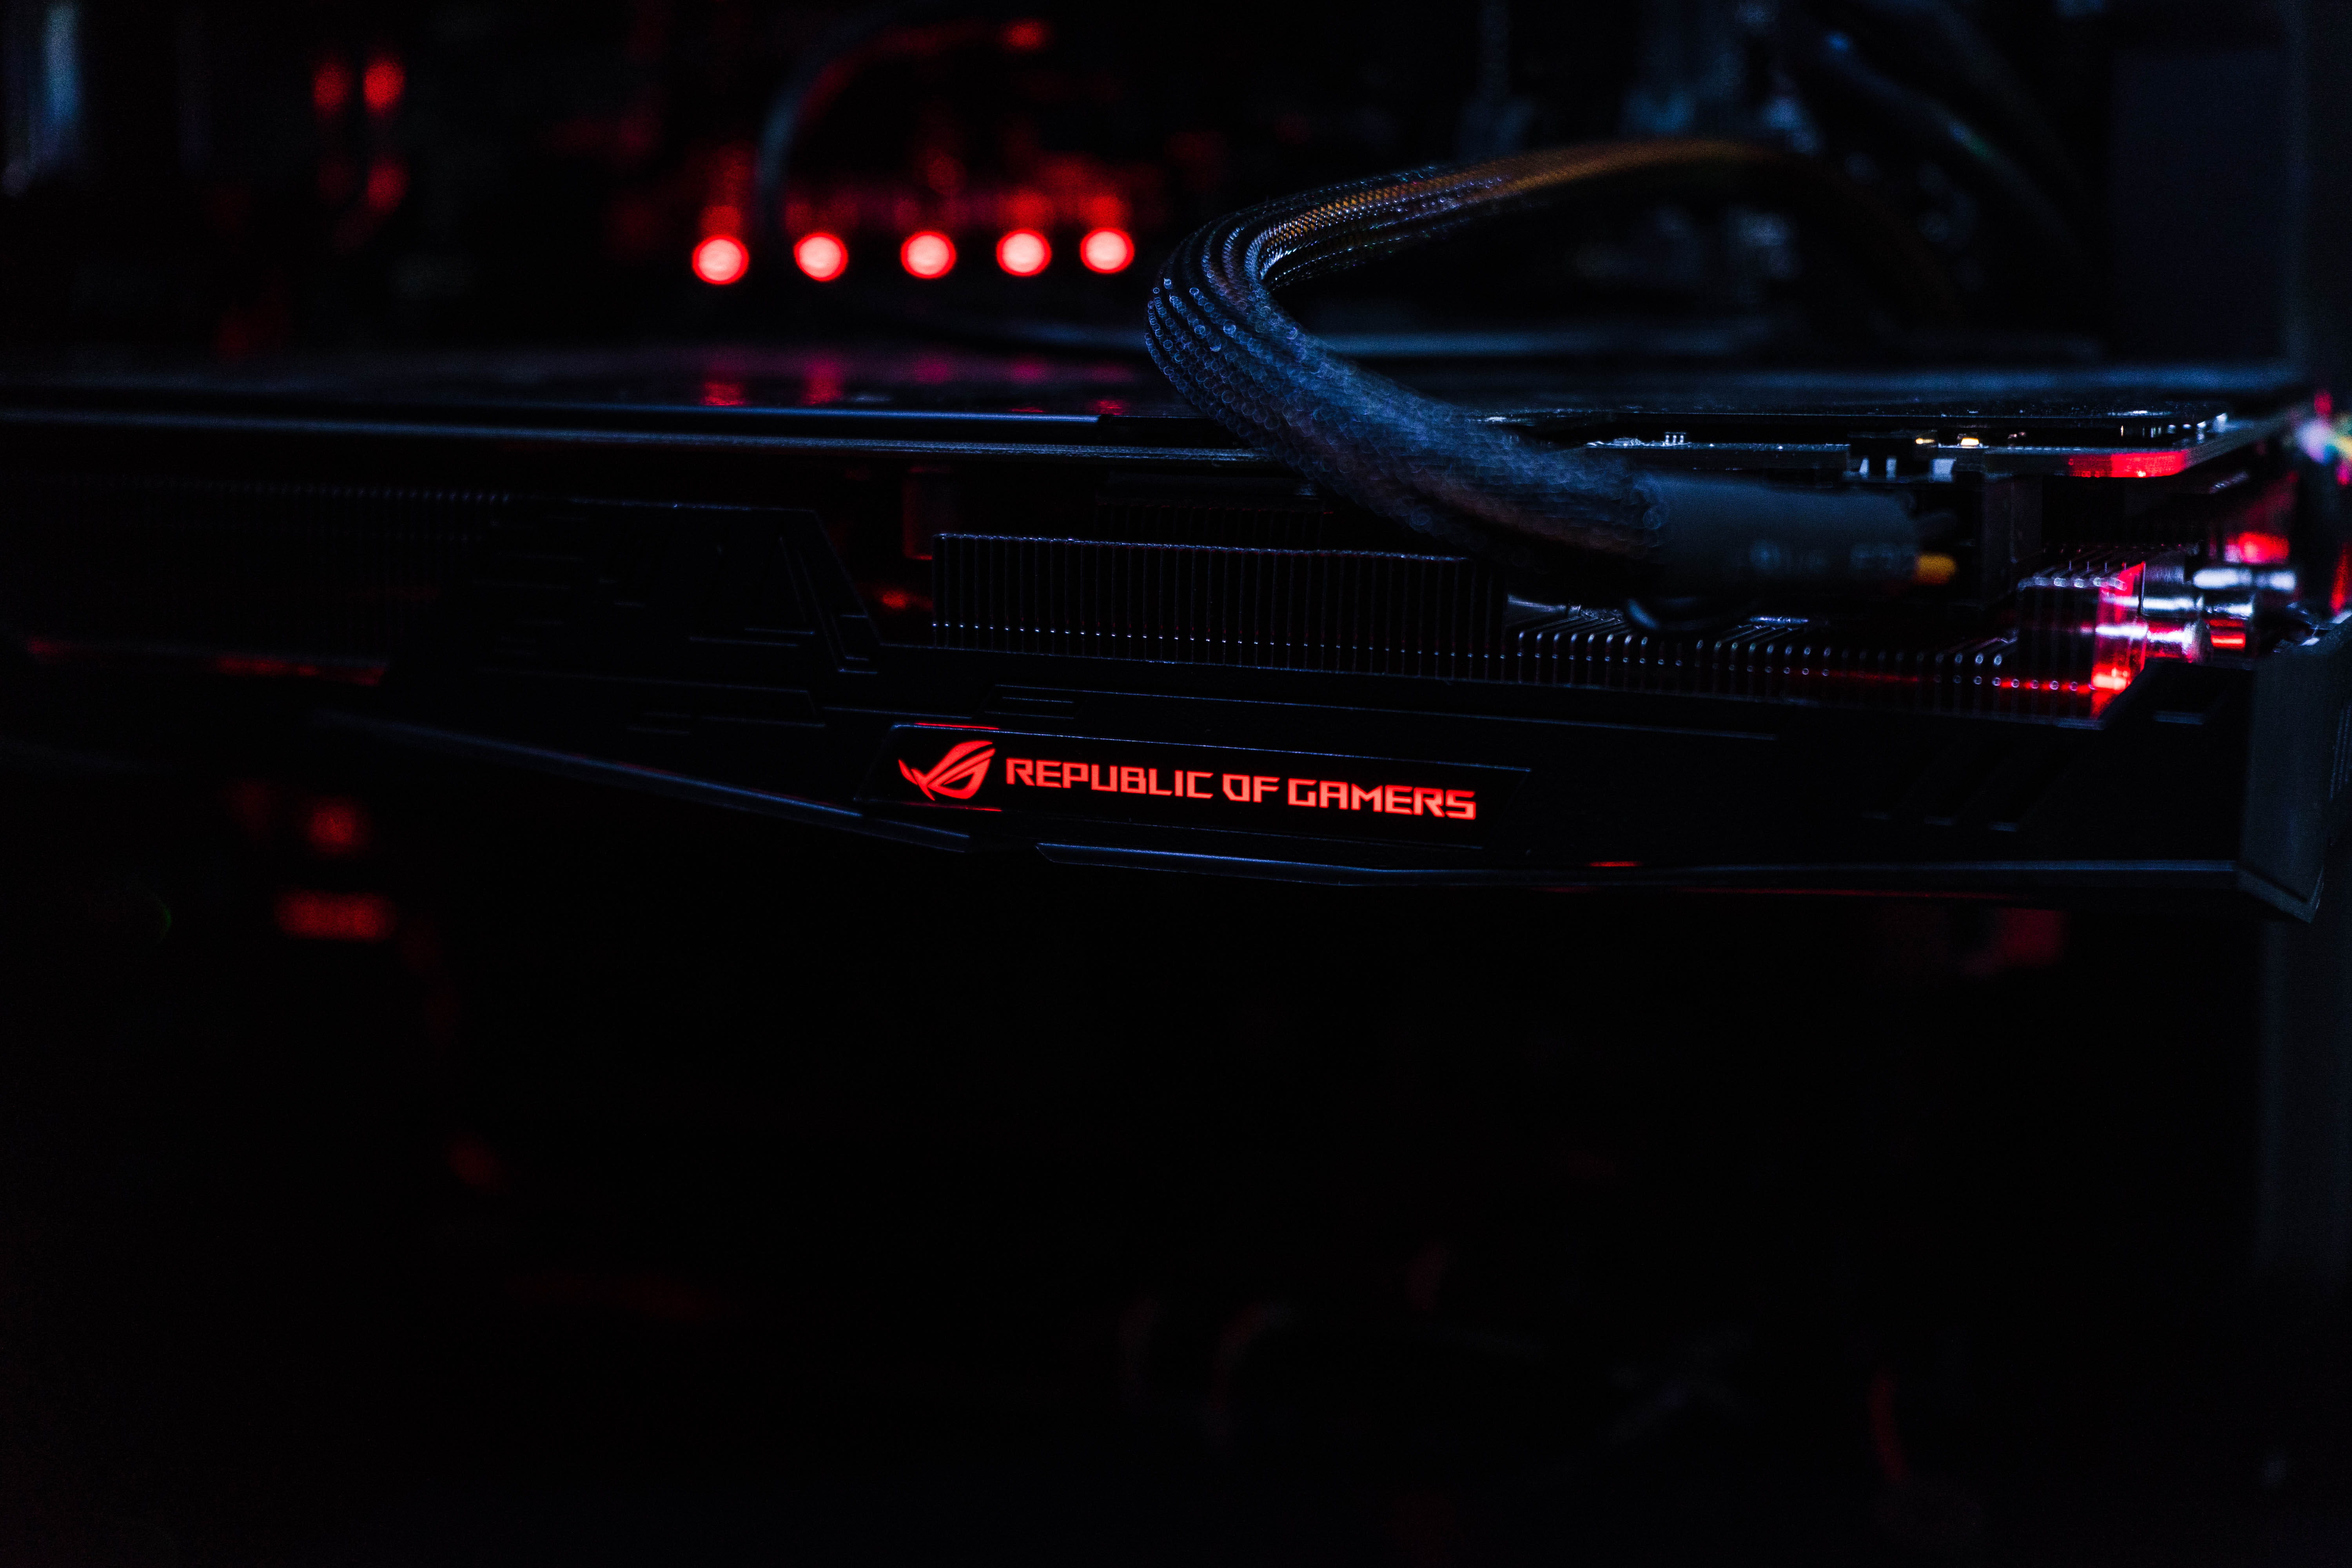 Asus ROG gaming tower, technology, red, no people, illuminated